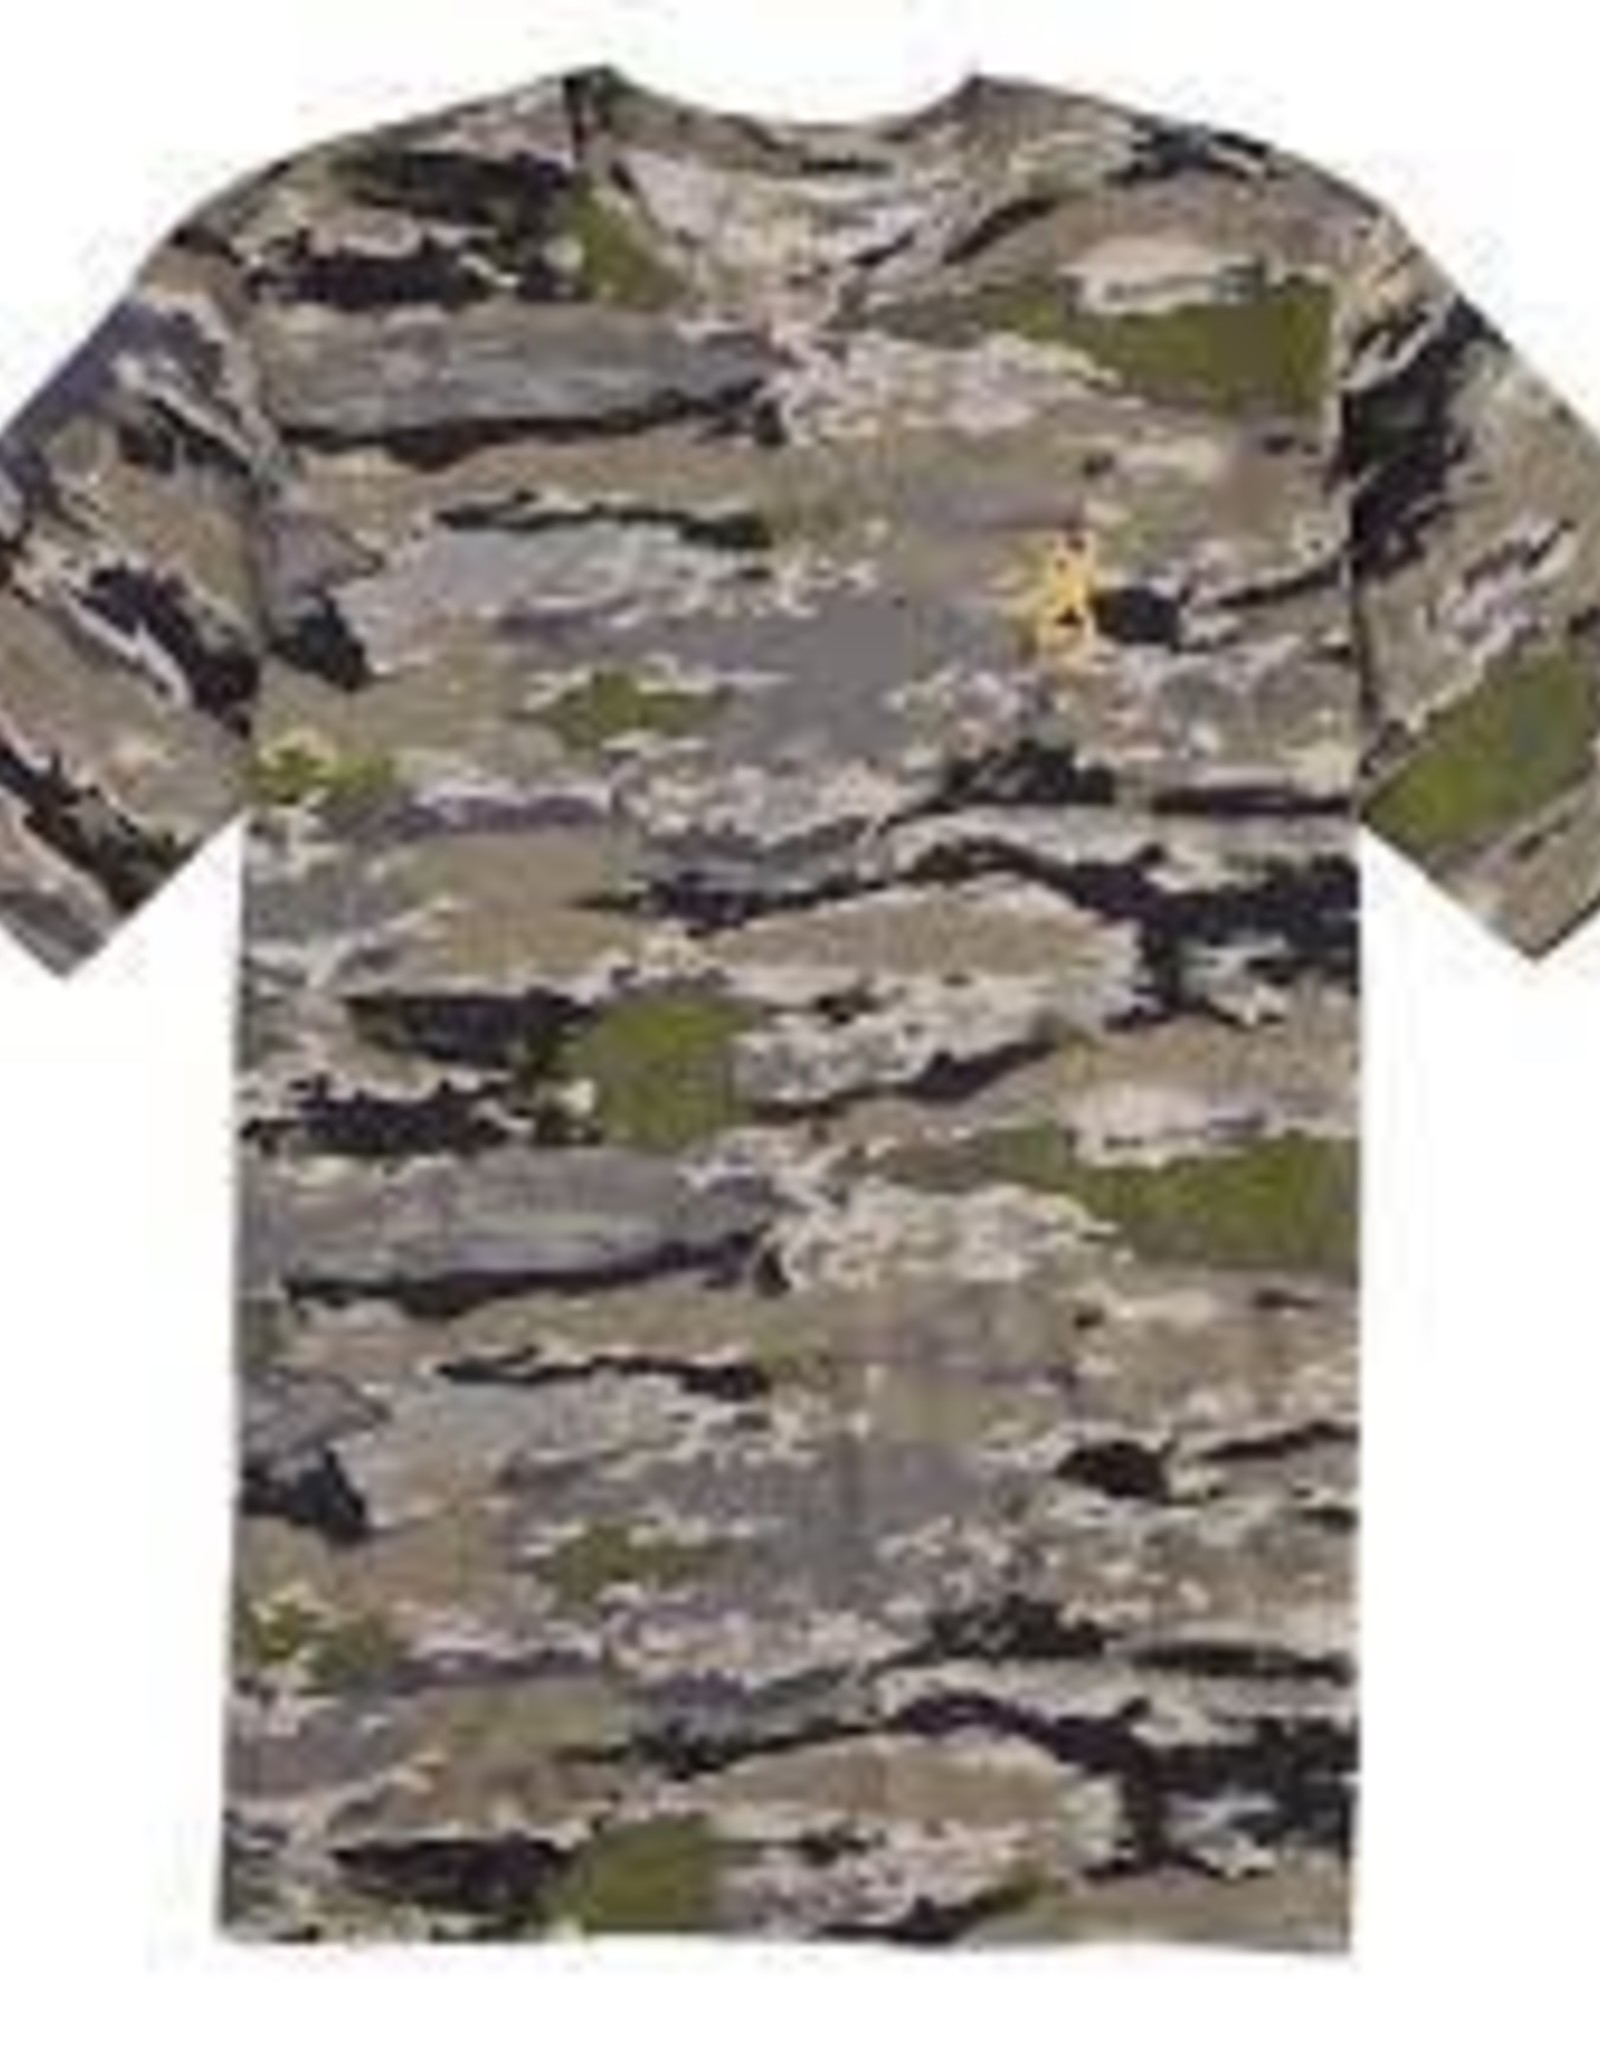 Browning Wasatch T-Shirt